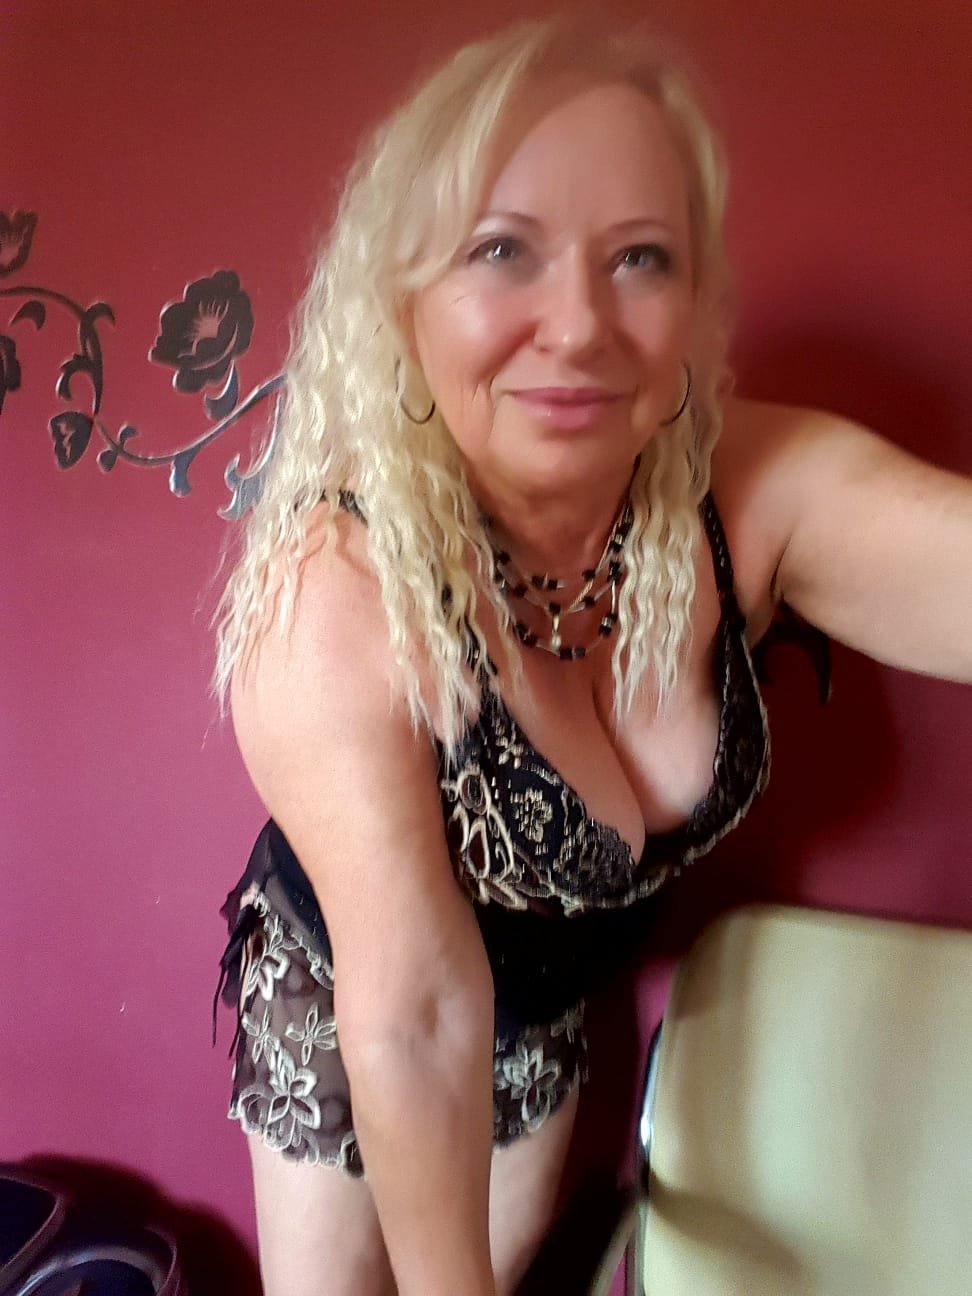 Find Escort Service in Aurich and Enjoy Time With Pretty Girls - model photo Ewa101